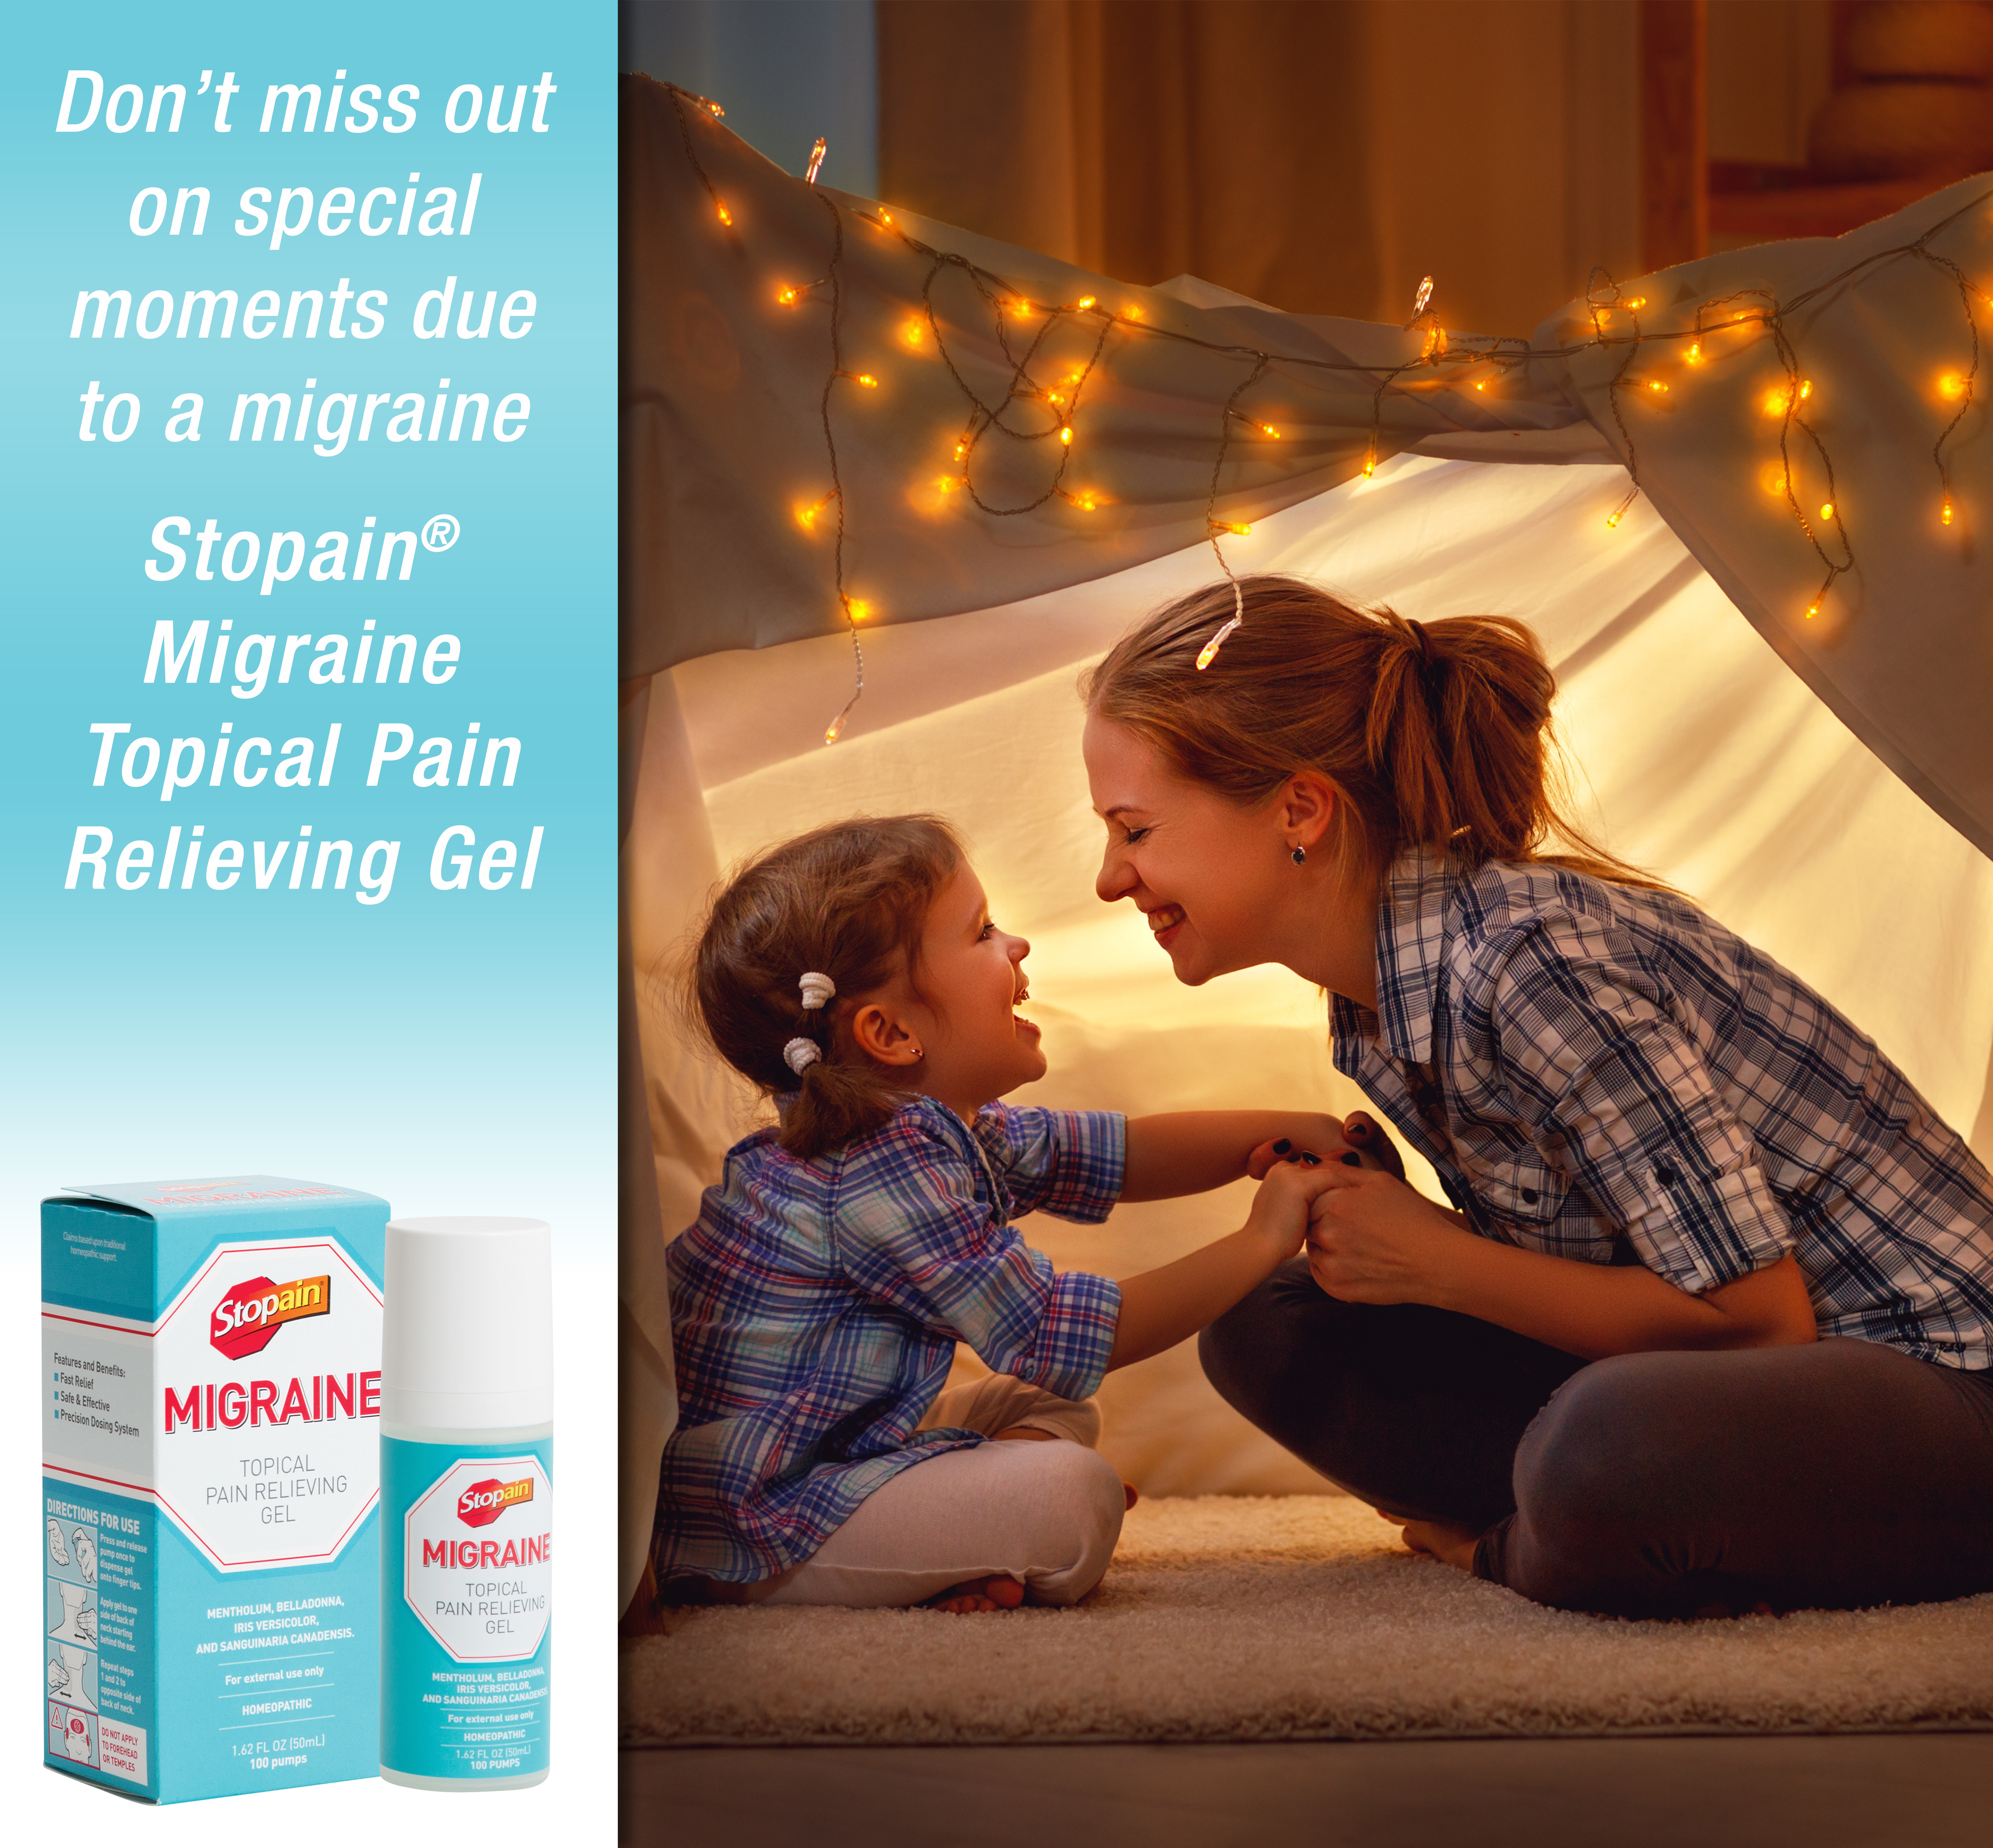 Stopain Migraine Topical Pain Relieving Gel, 1.62 fl oz - image 3 of 10